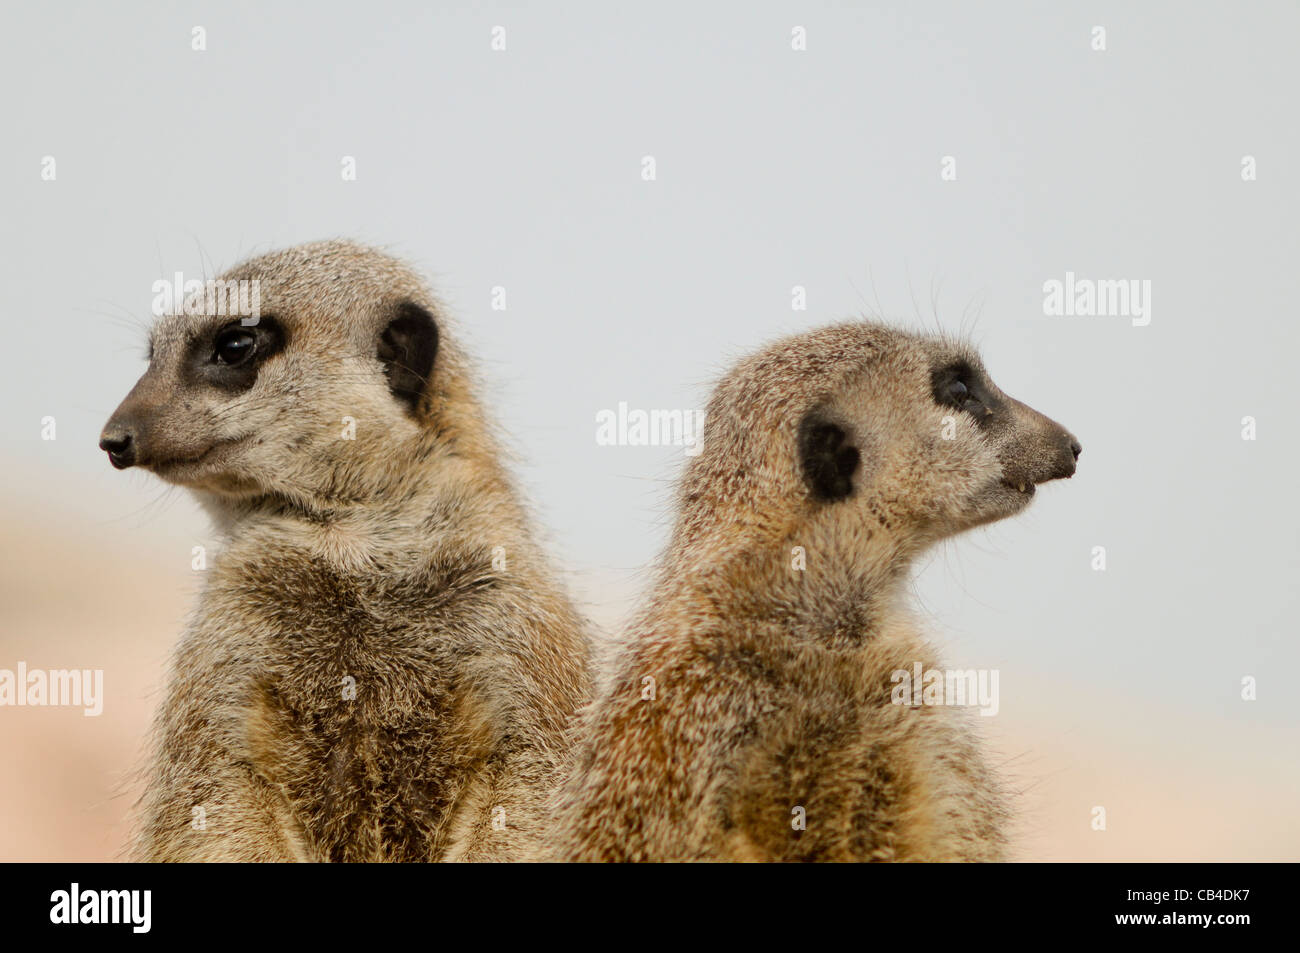 A close-up view of two meerkats looking to opposite sides Stock Photo